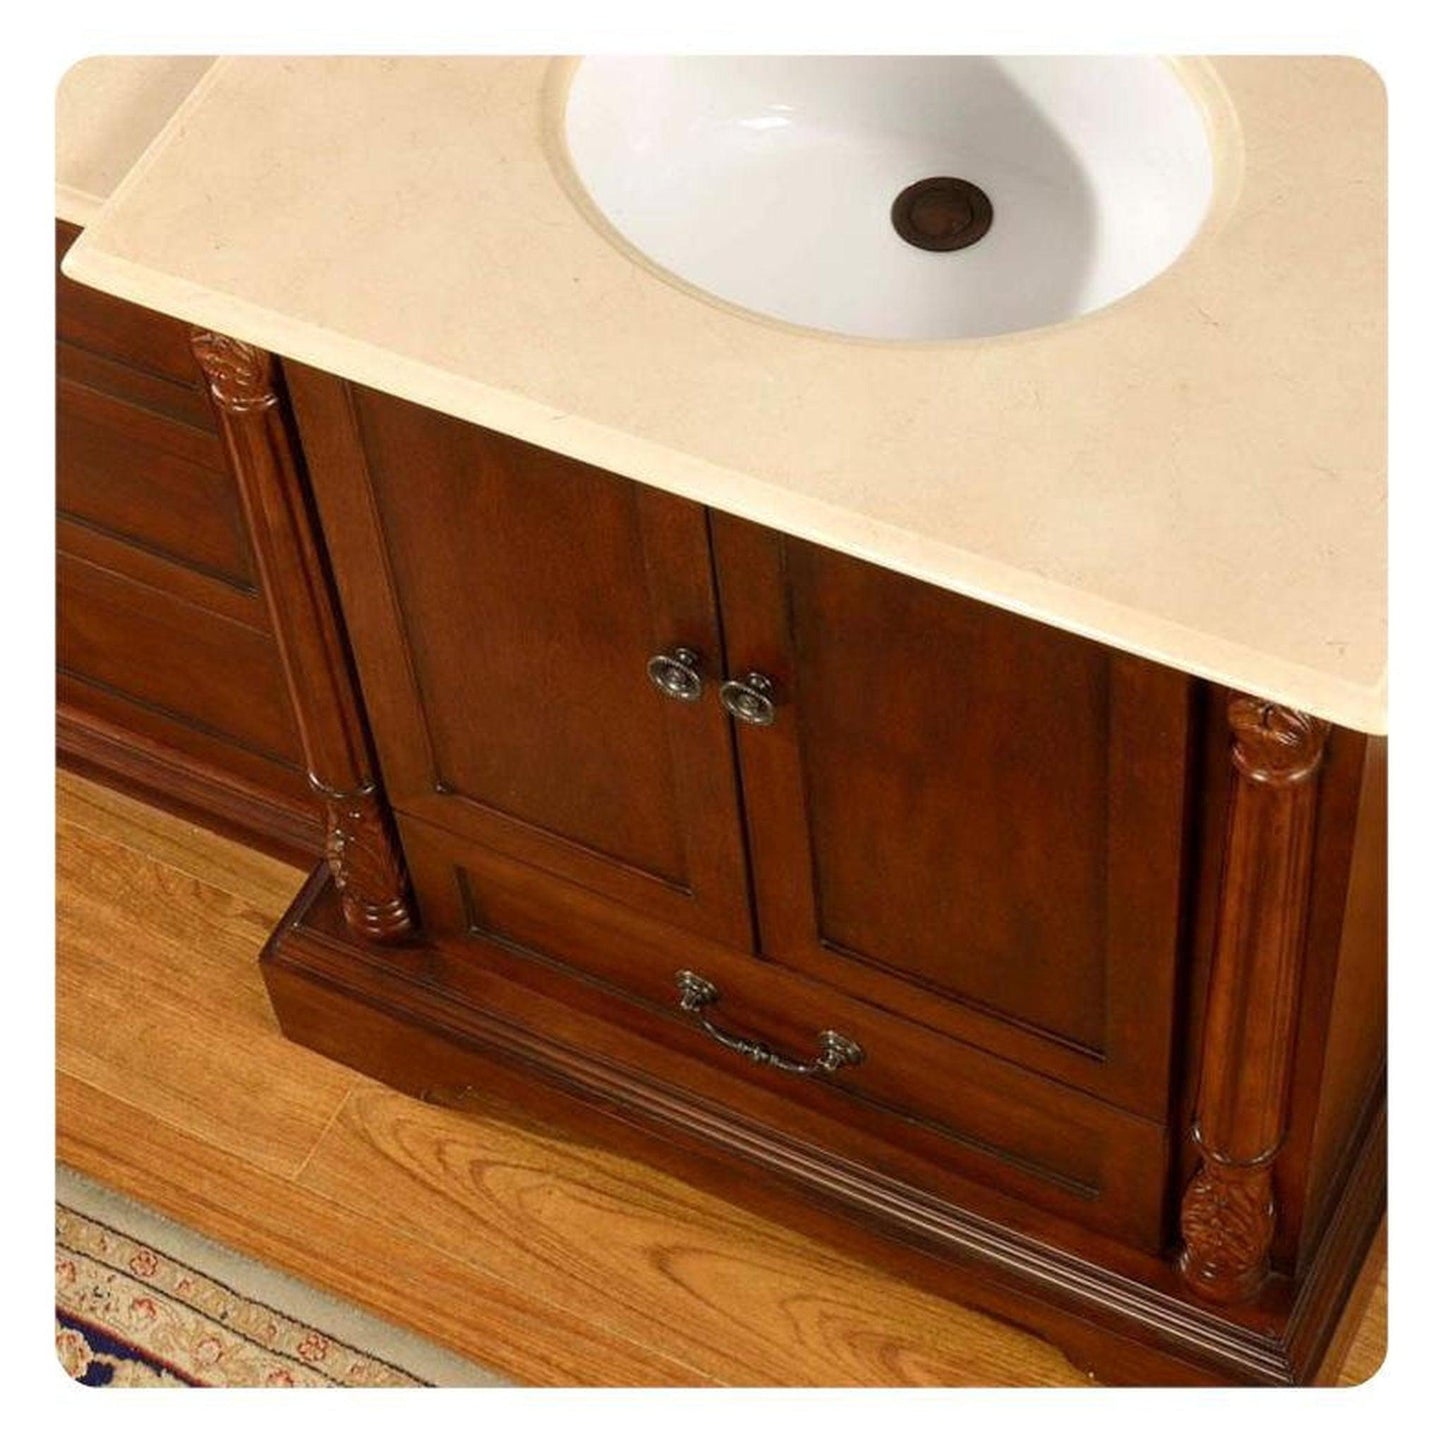 Silkroad Exclusive 56" Single Sink Walnut Modular Bathroom Vanity With Crema Marfil Marble Countertop and White Ceramic Undermount Sink